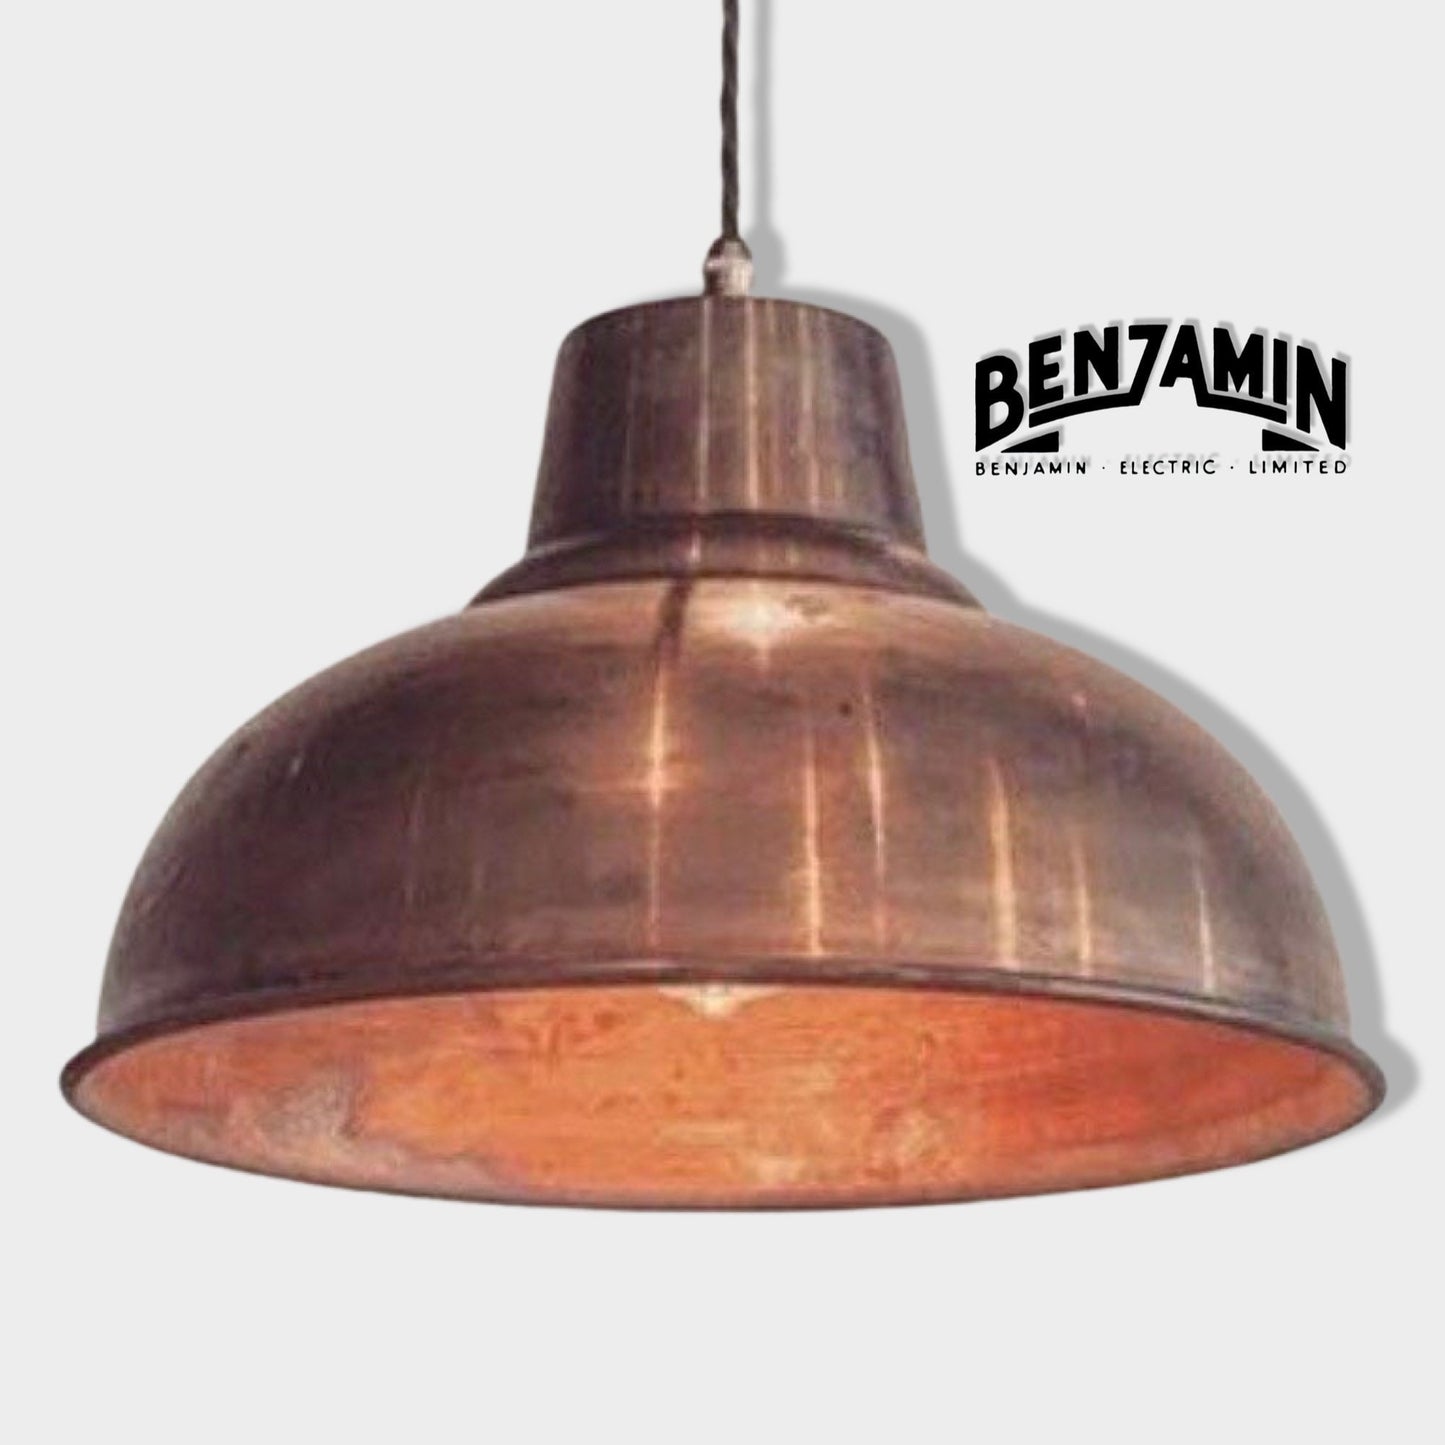 Salthouse XL ~ Copper Industrial Factory Shade | Ceiling Light | Dining Room | Kitchen Table | Vintage Filament Lamps Pendant 14.5 Inch